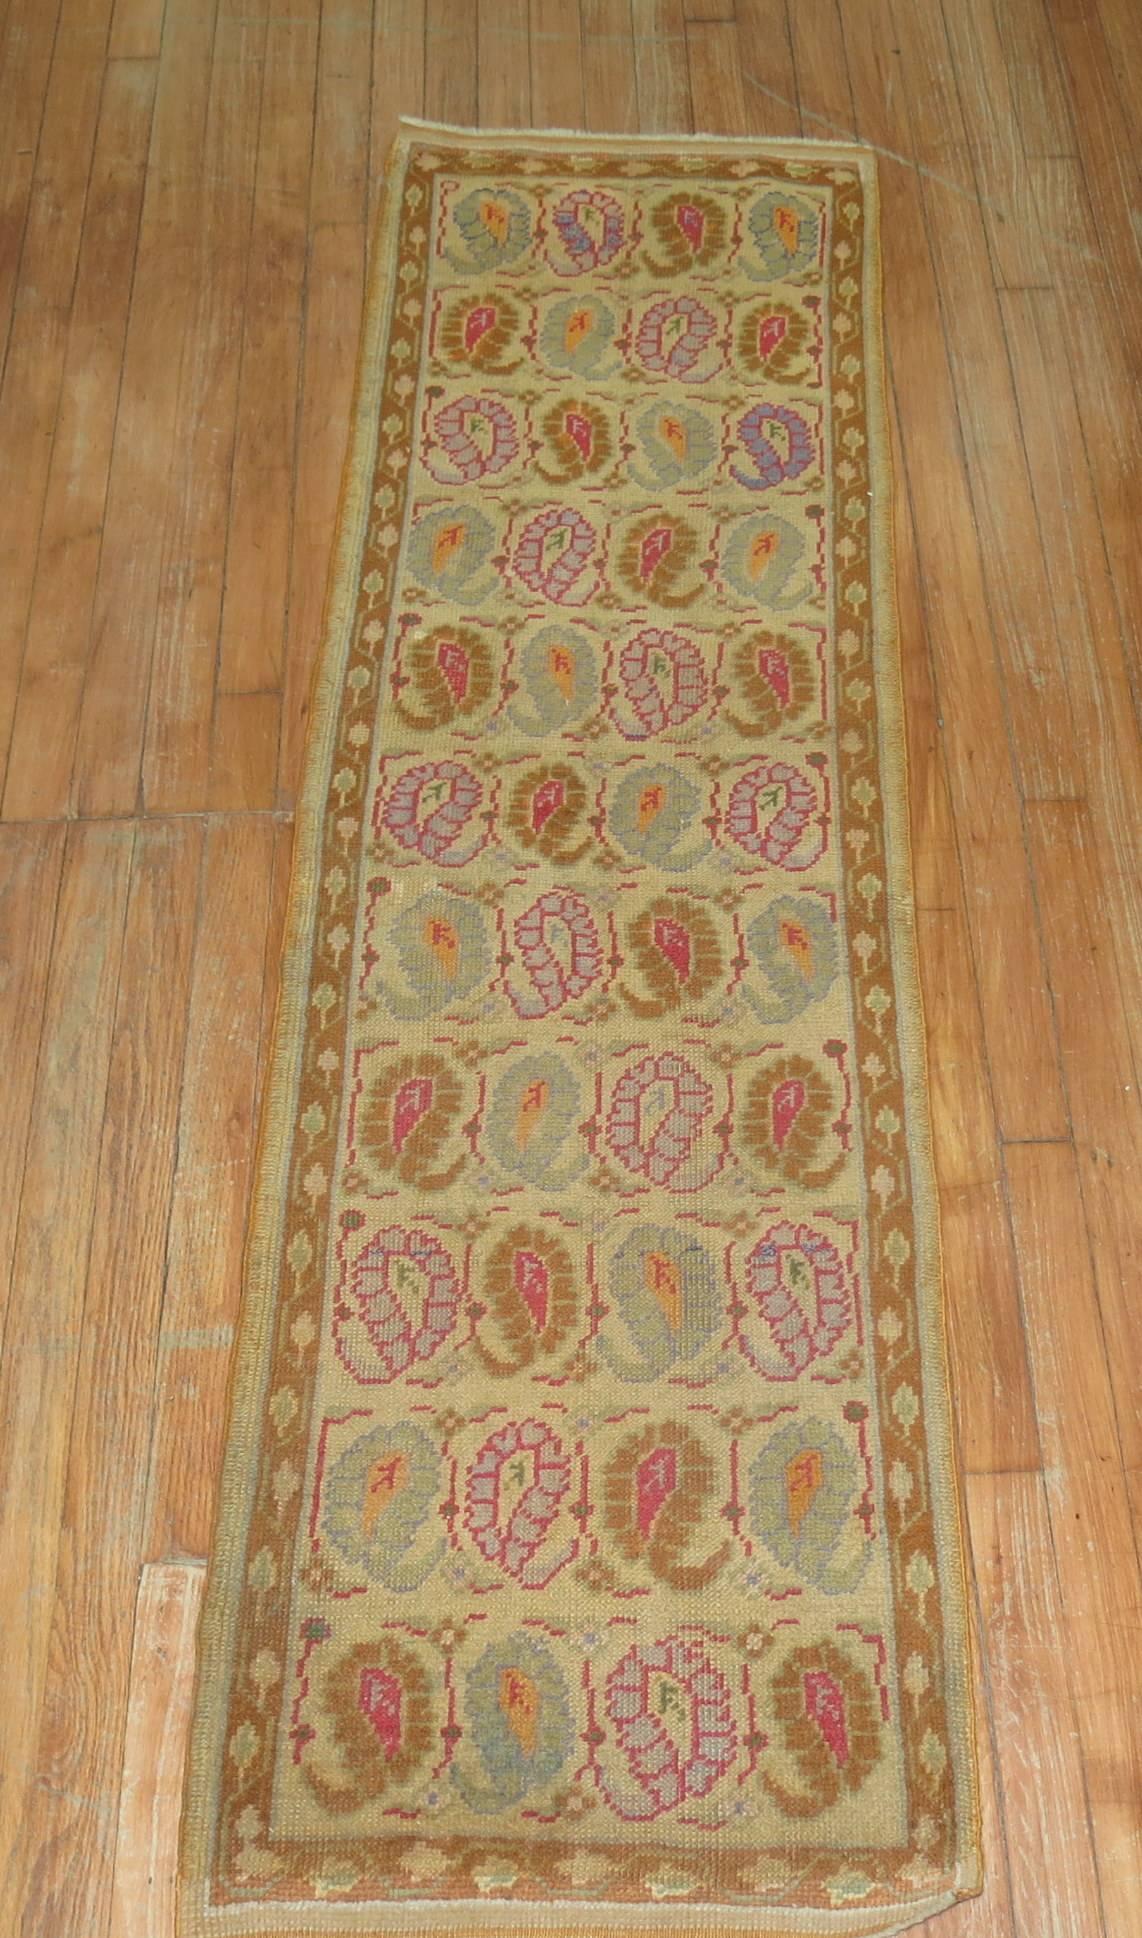 One of a kind small Turkish runner with colorful paisley design in predominant lavender and hot pink accents.

1'9'' x 5'10''